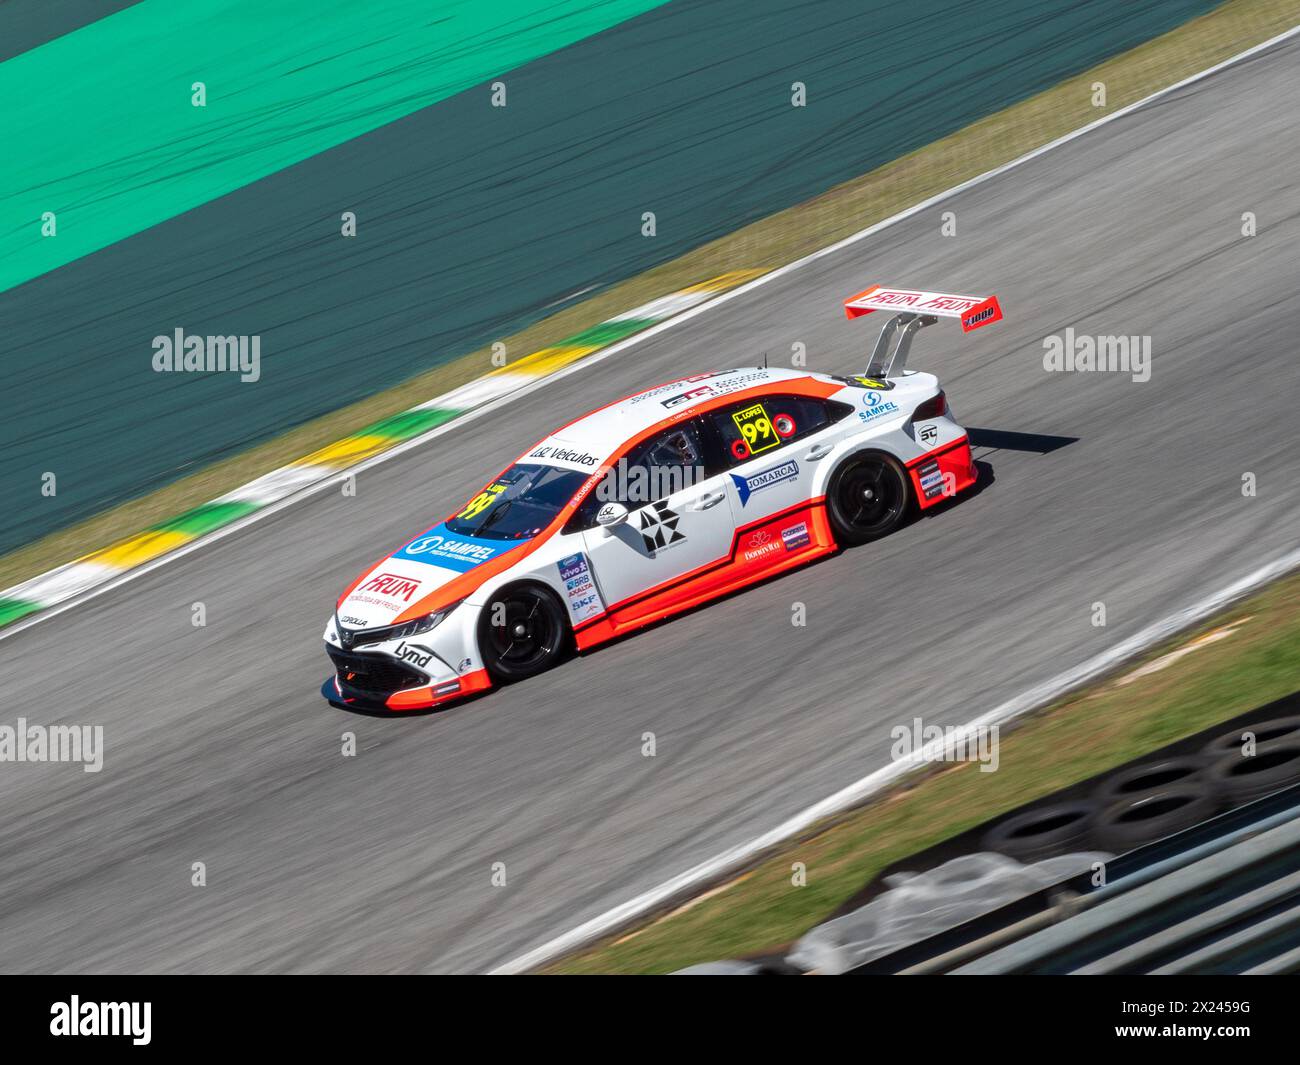 April 19, 2024, Sao Paulo, Sao Paulo, Brasil: SAO PAULO, (SP) - 04/19/2024 - STOCKCAR/MITSUBISHI/ESPORTE/SP - View of the free practice sessions for Stock Car, Formula 4 and the presentation of Mitsubishi as a new brand that will participate in Stock Car from the year 2025 with new SUV bodies. Fernando Julianelli, CEO of vicar, led the presentation with guests representing the Japanese brand and the drivers who best represented Mitsubishi in Stock Car at the beginning of the 200s, such as Caca Bueno and Ingo Hoffman, as well as driver Guilherme Spinelli, a big name for the company in the rally Stock Photo